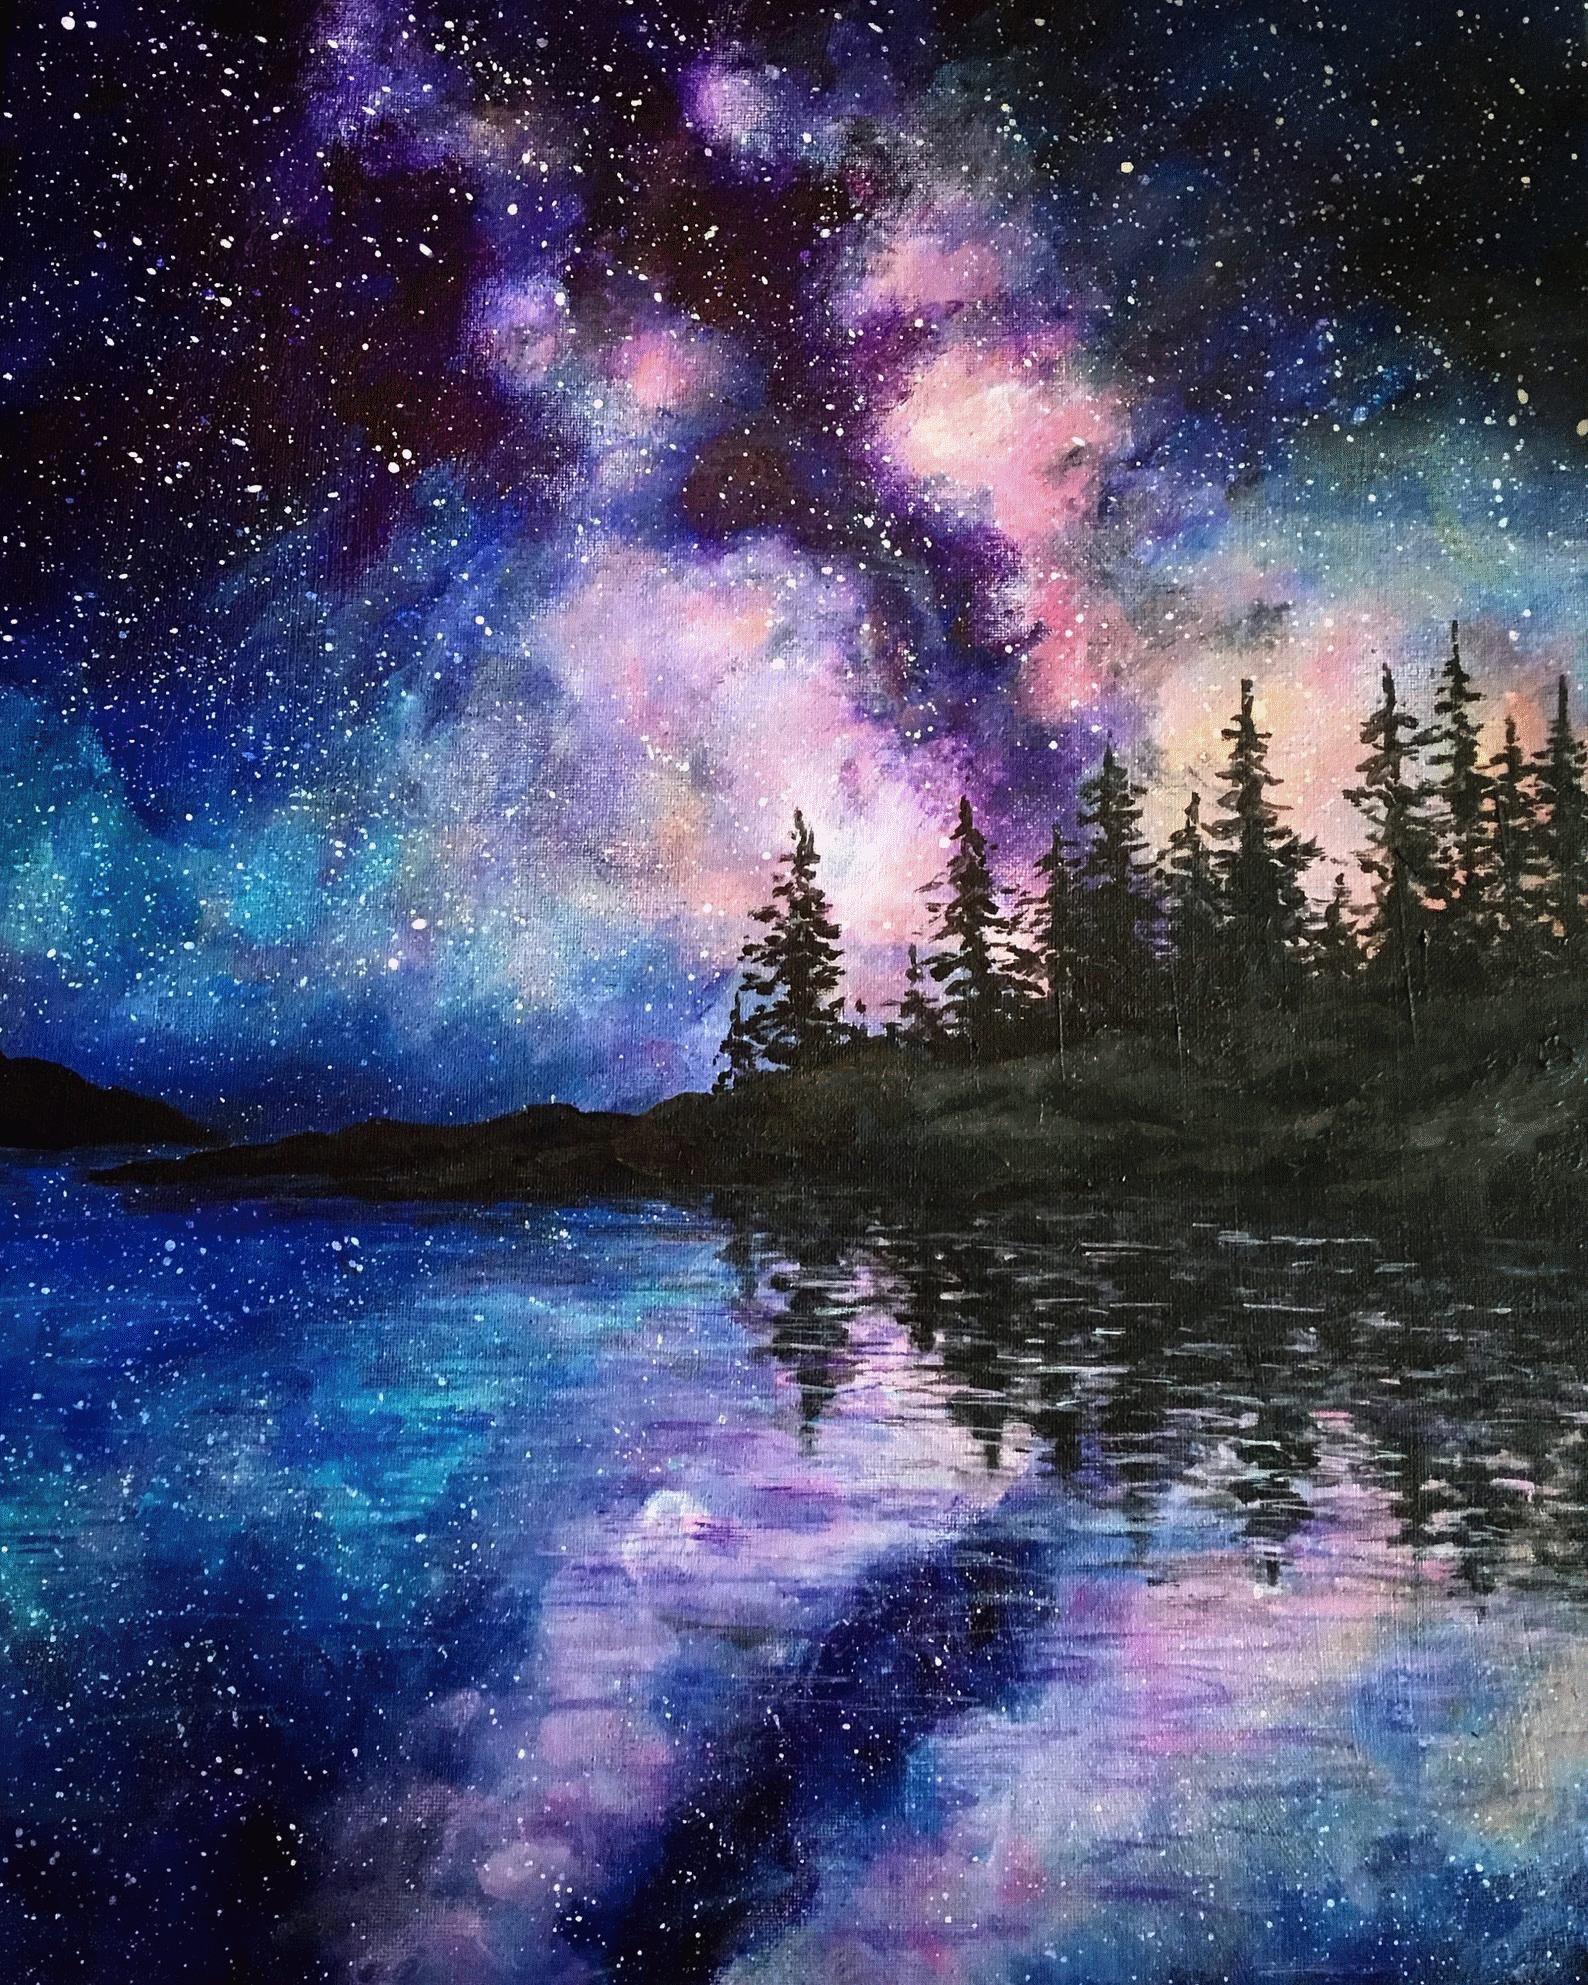 acrylic painting ideas for beginners galaxy lake map of the milky way small